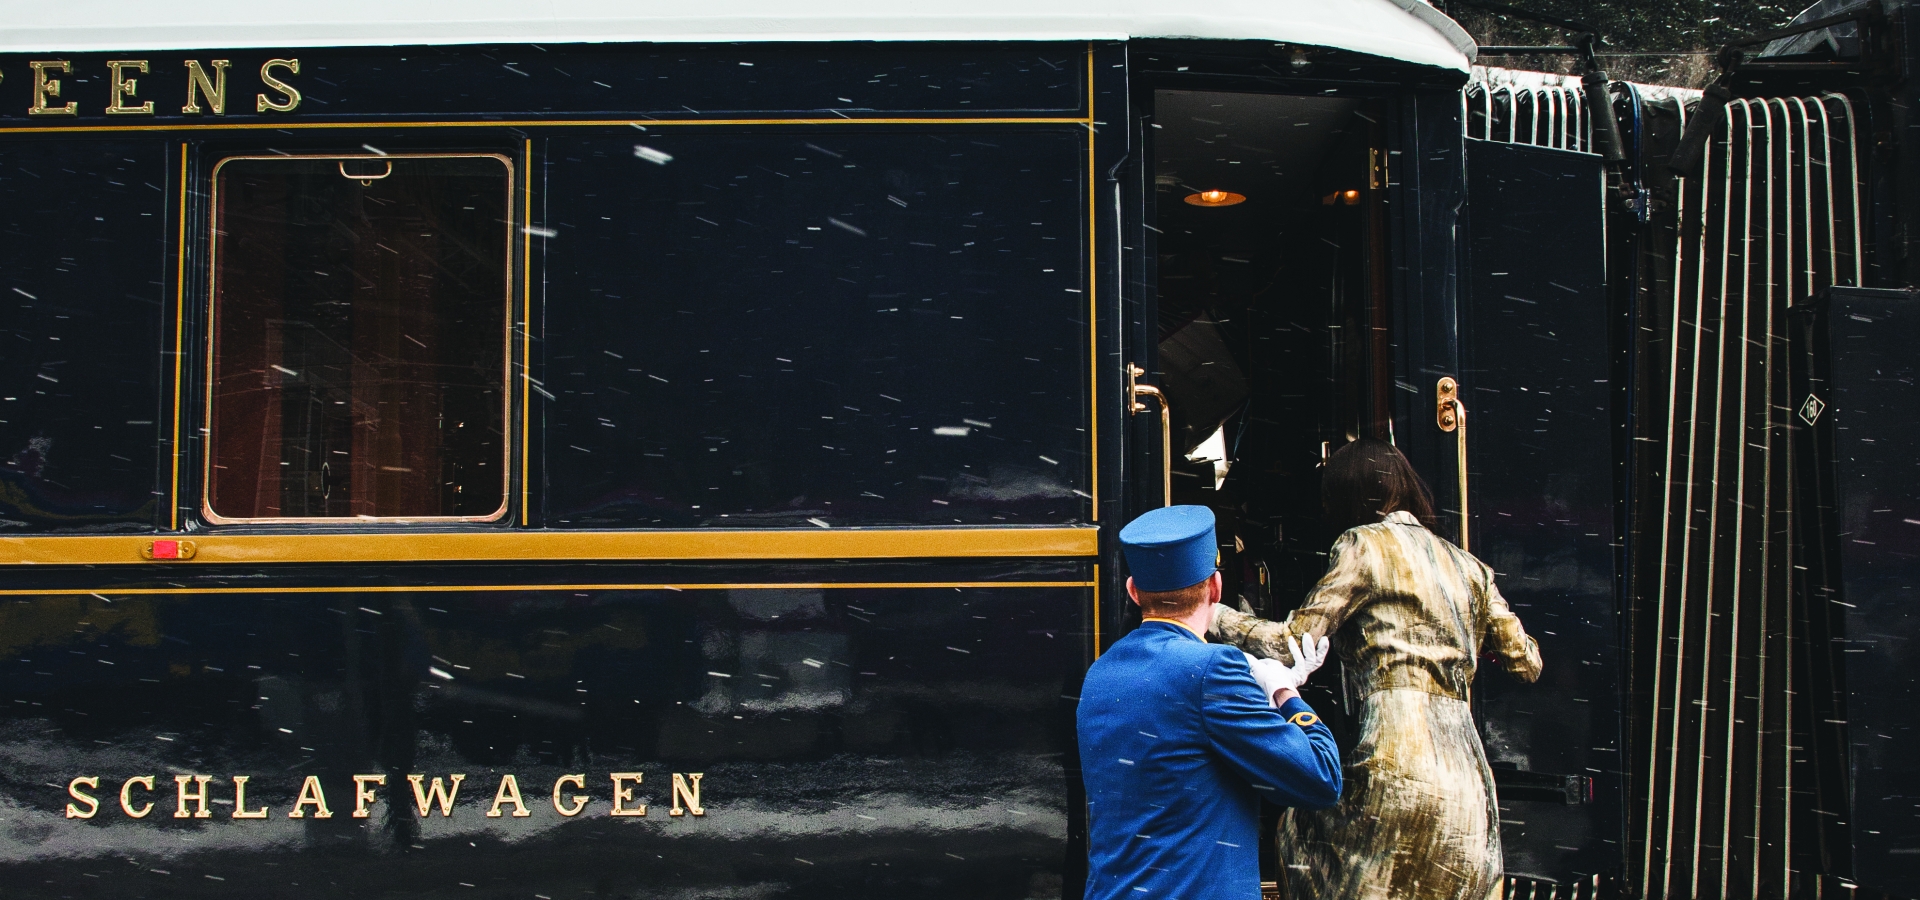 Venice Simplon-Orient Express - The World's Most Iconic Train